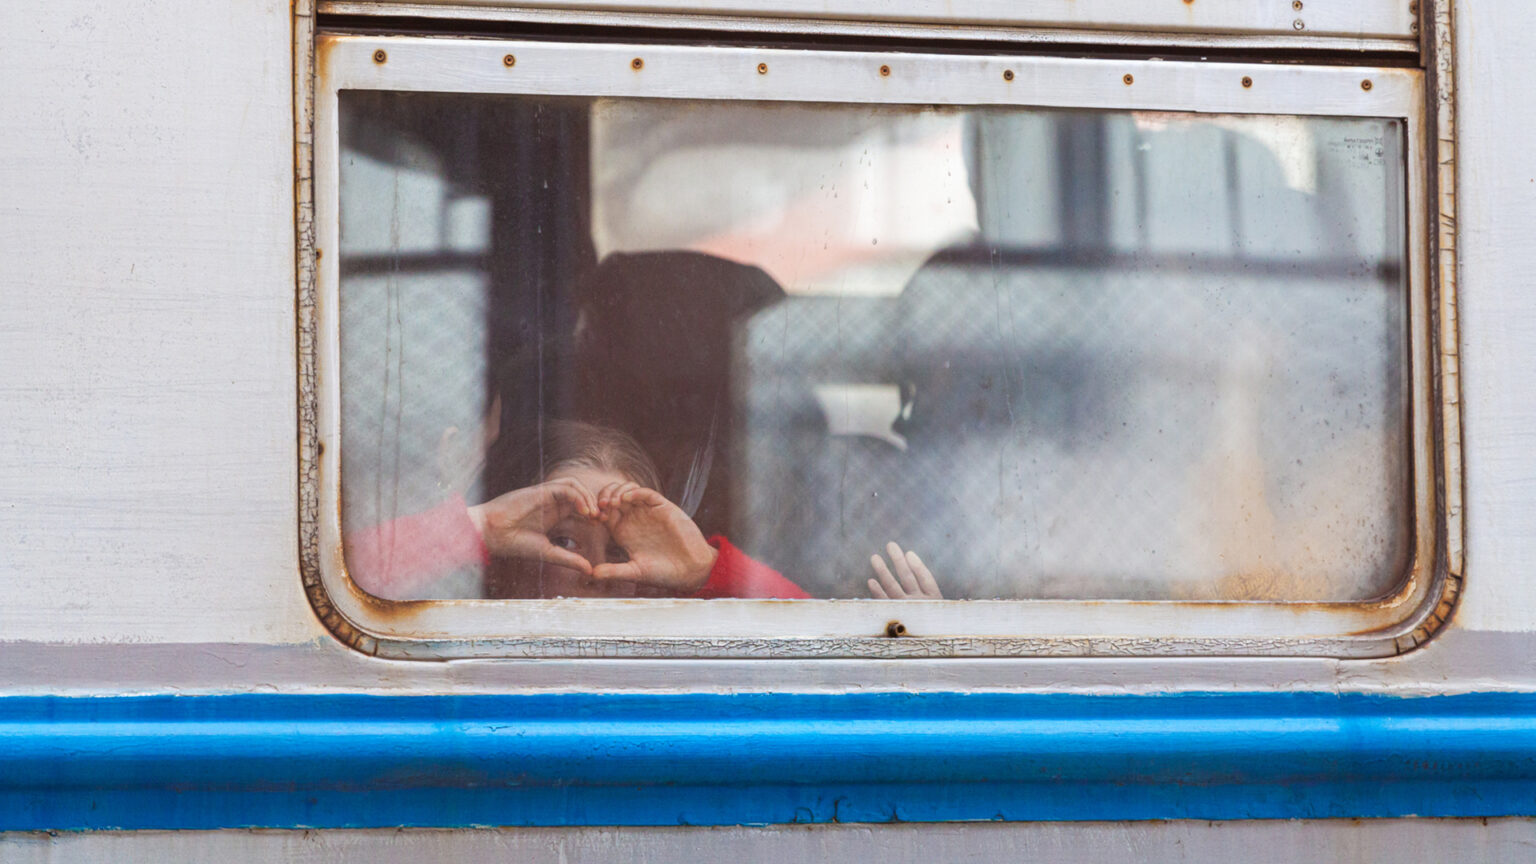 A child inside a train looks out a window and makes a heard symbol with their hands.